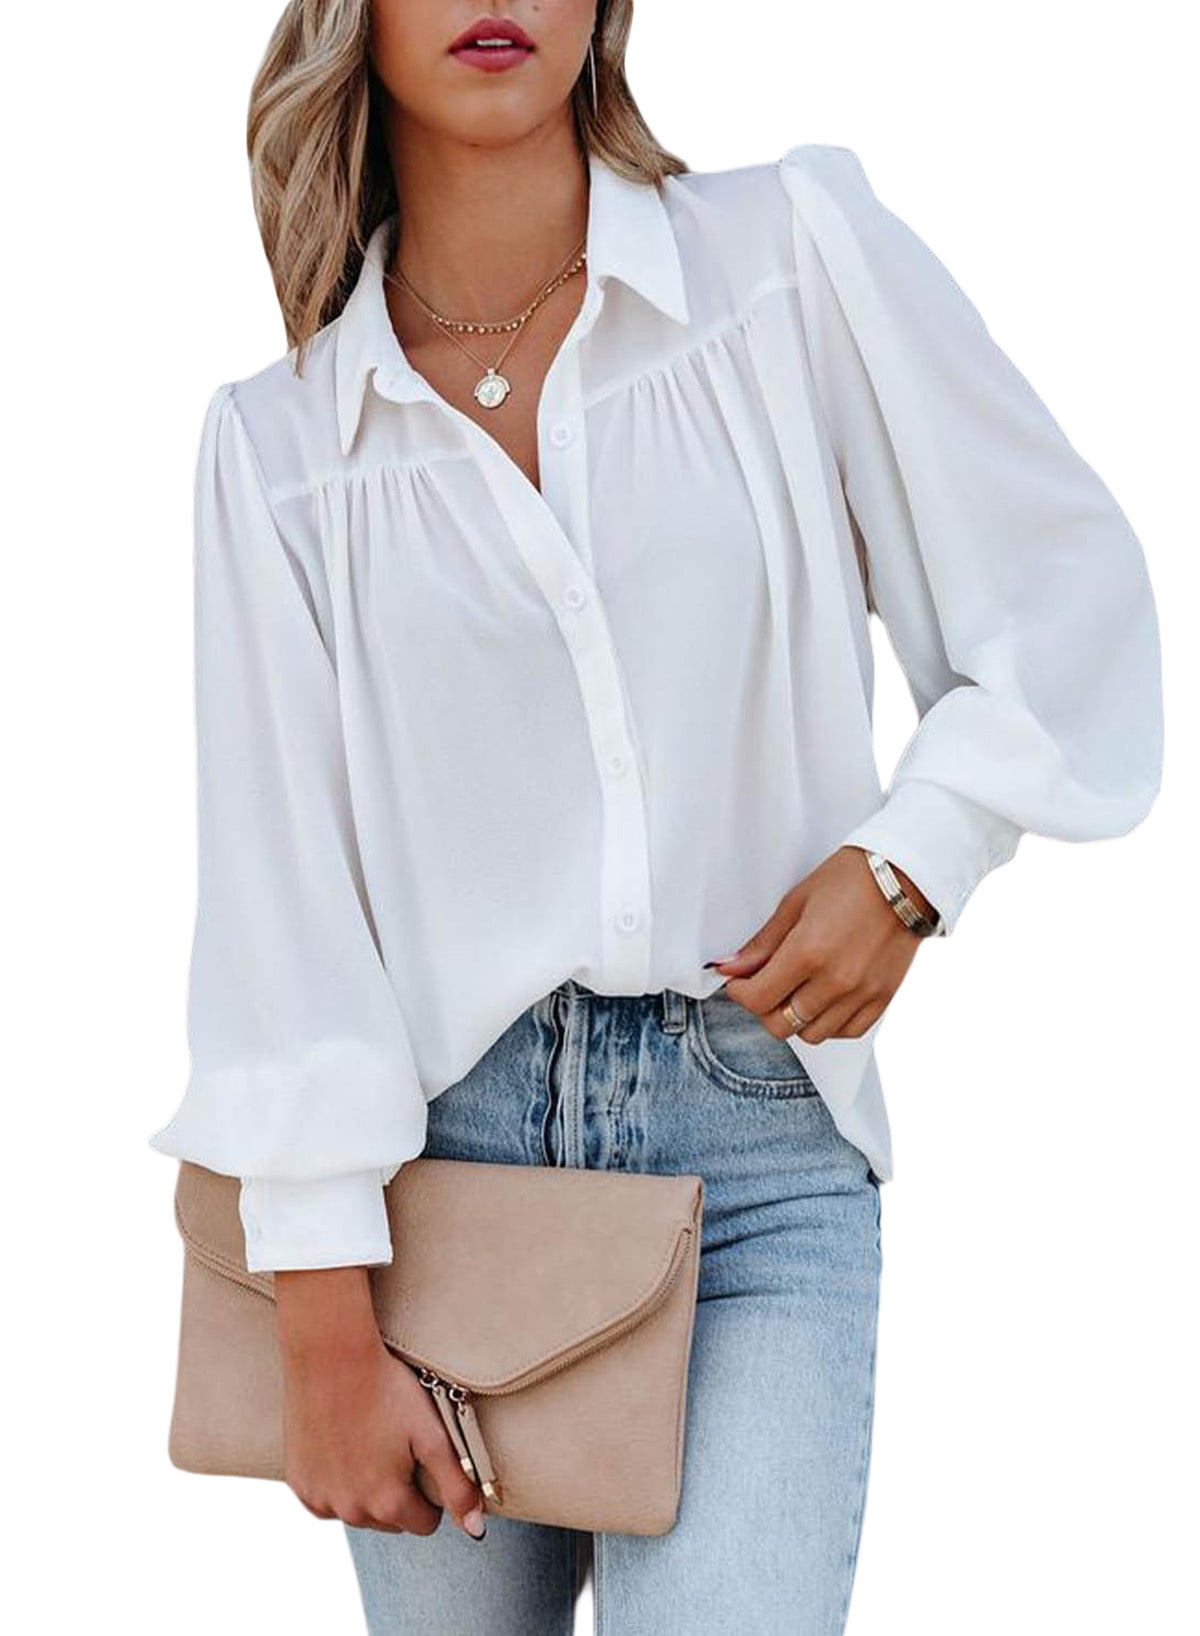 FARYSAYS Long Sleeve Shirts for Womens Blouses and Tops Ladies